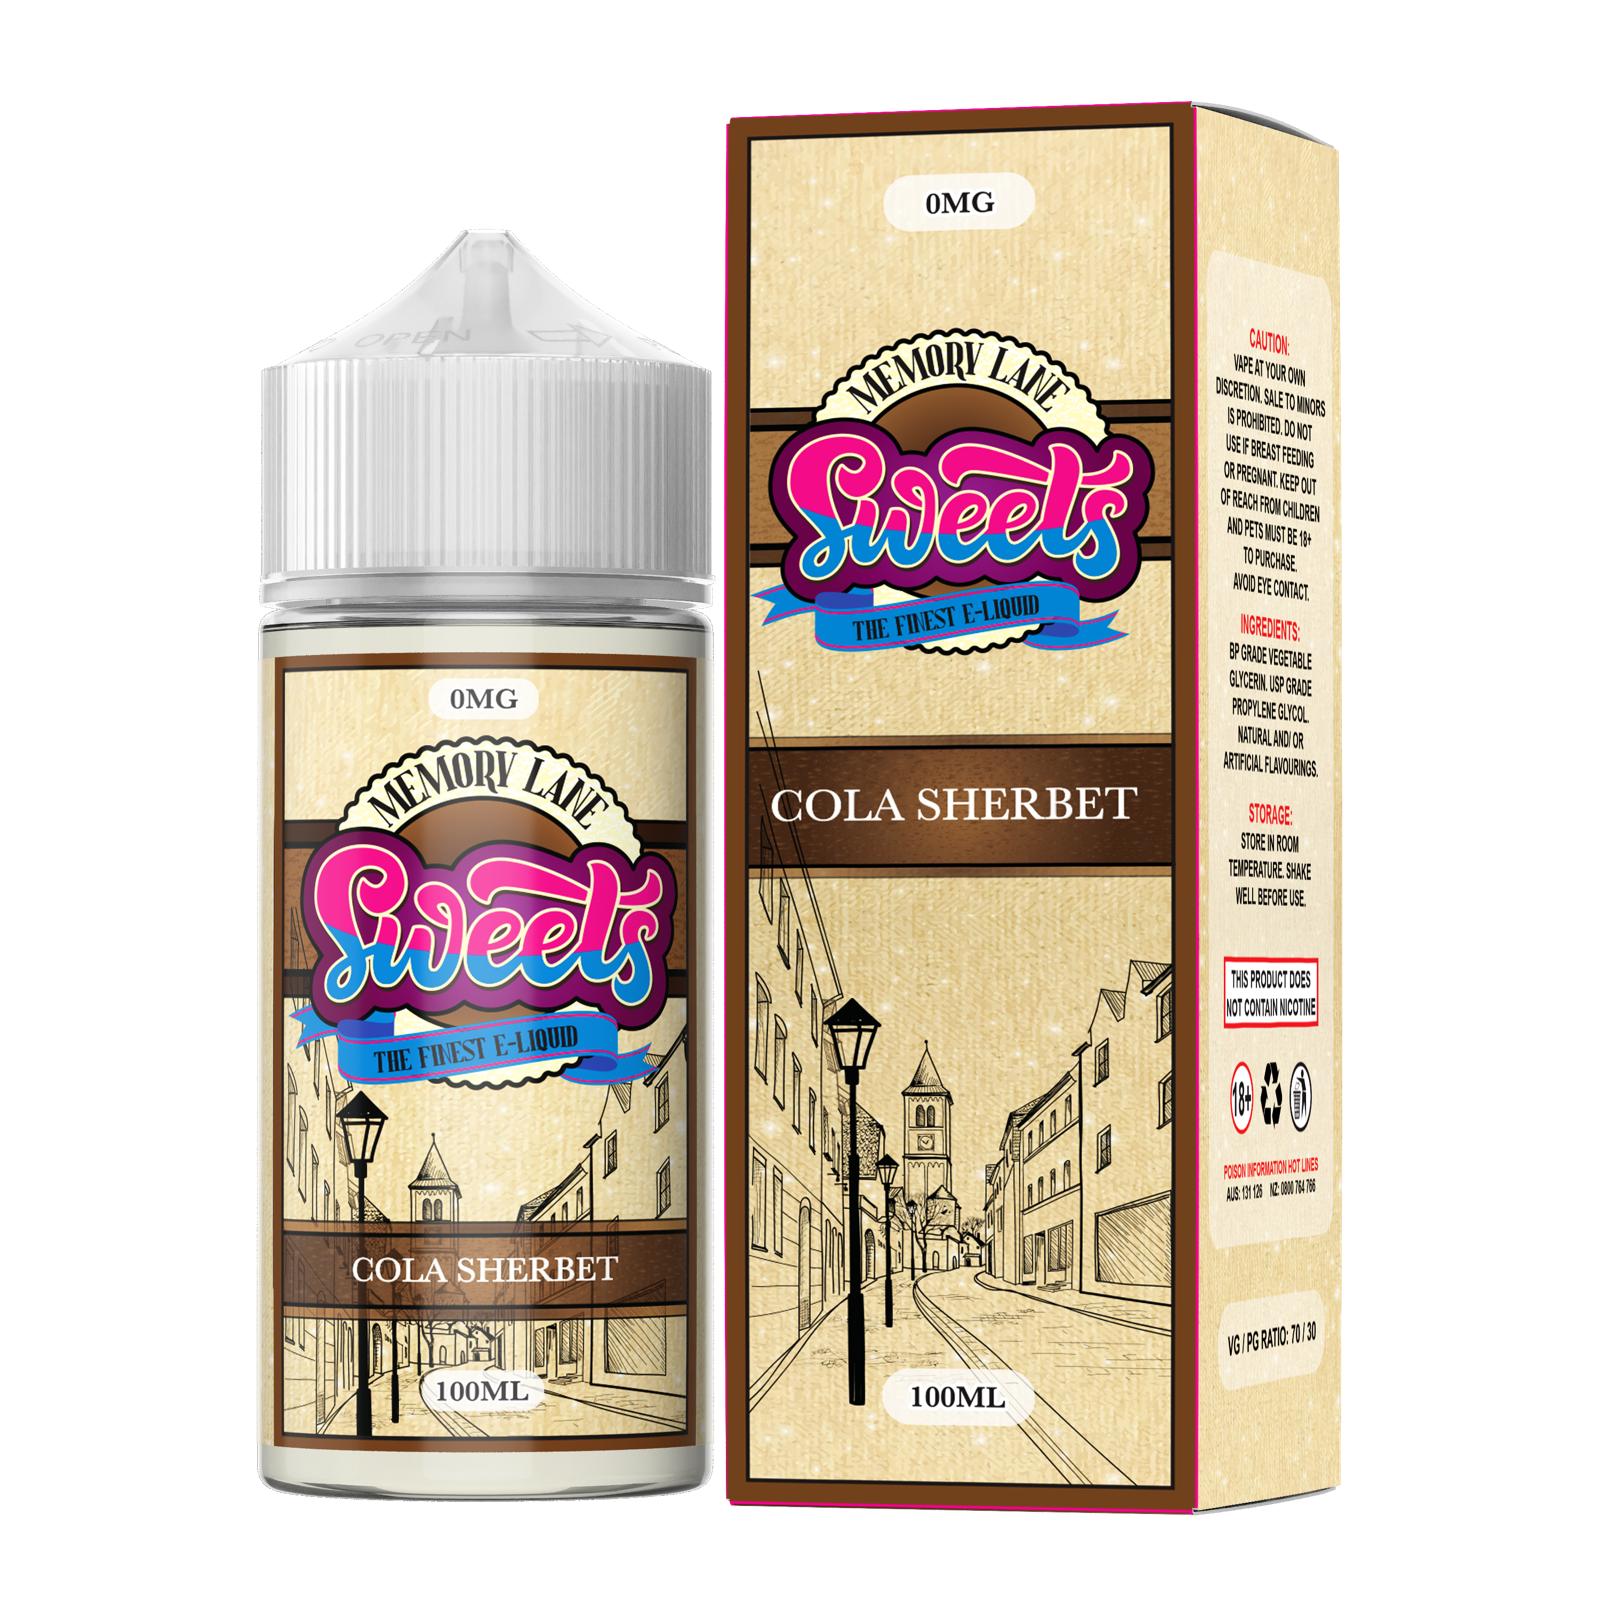 Buy Cola Sherbet by Memory Lane Sweets - Wick And Wire Co Melbourne Vape Shop, Victoria Australia